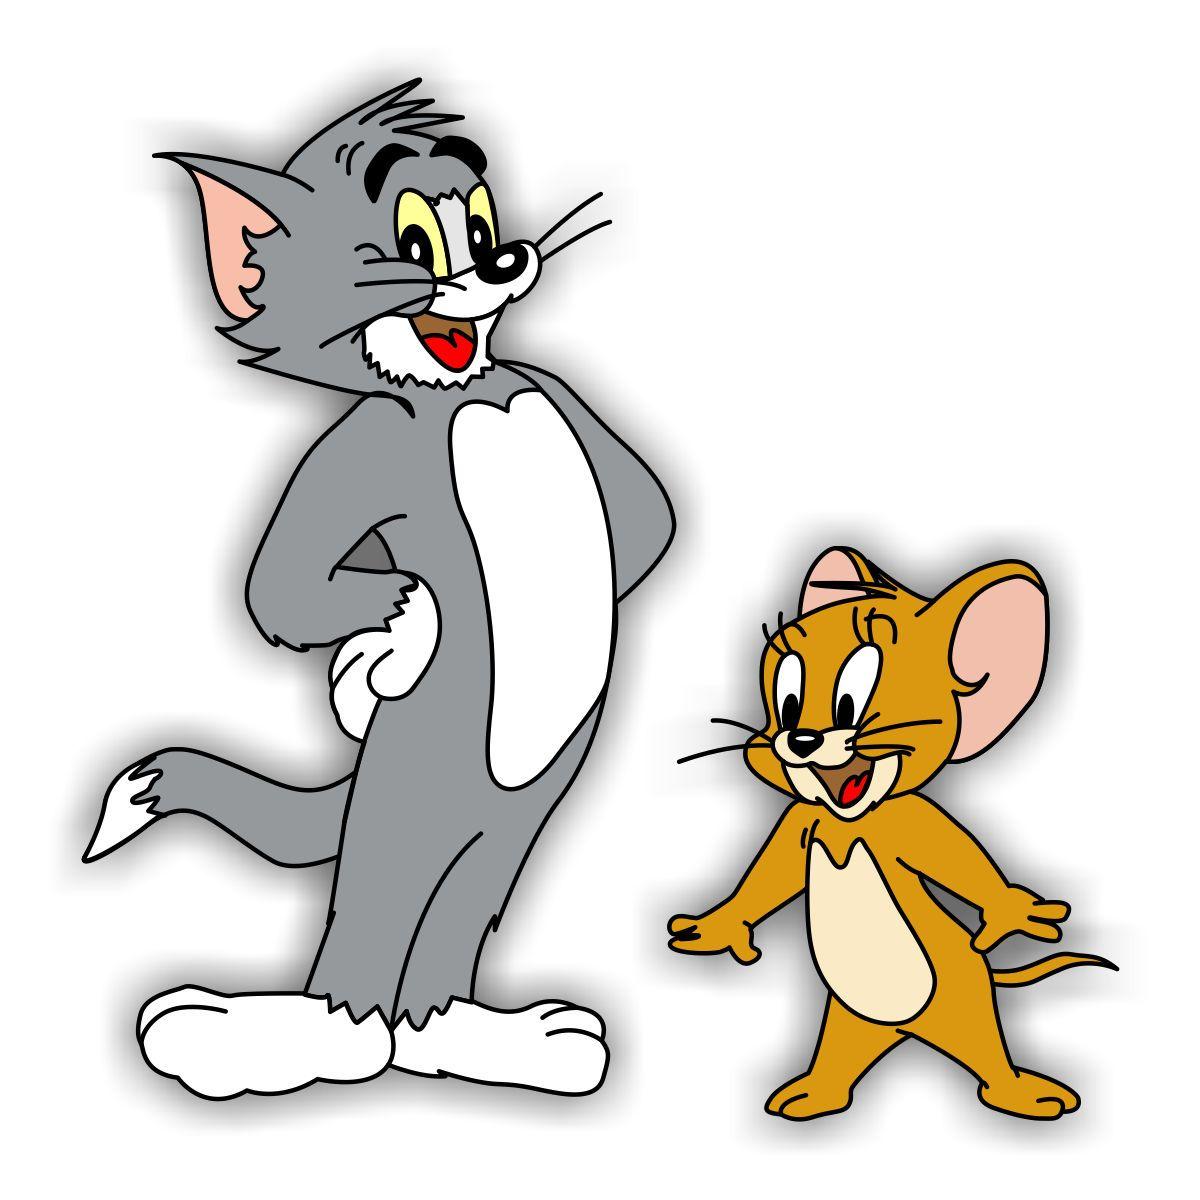 Tom and Jerry 3D Wallpapers - Top Free Tom and Jerry 3D ...